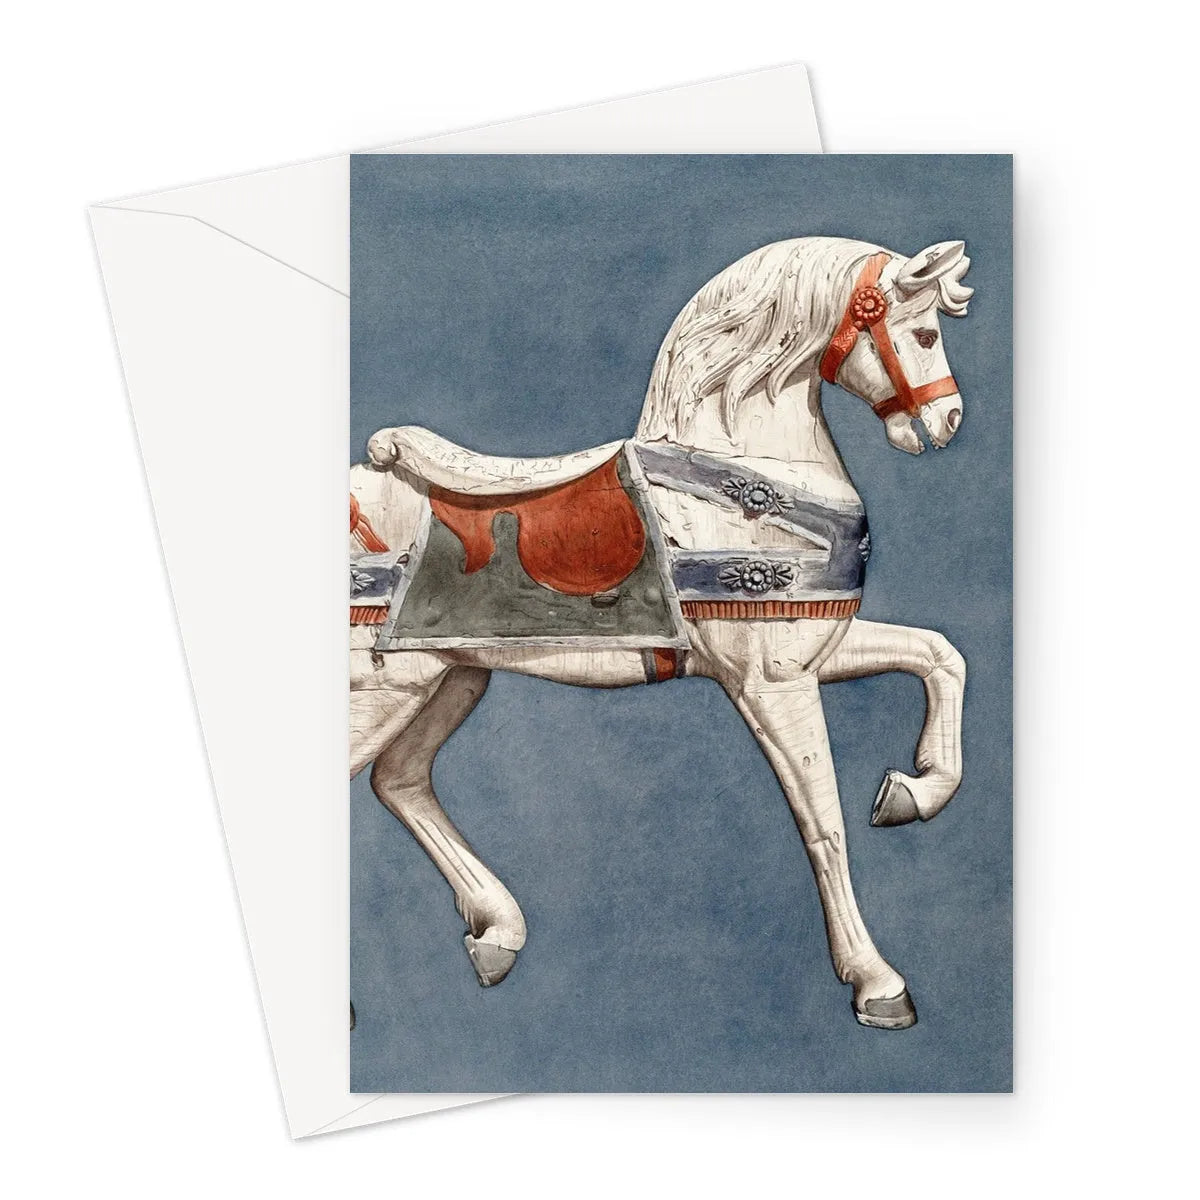 Carousel Horse By Henry Murphy Greeting Card - A5 Portrait / 1 Card - Greeting & Note Cards - Aesthetic Art